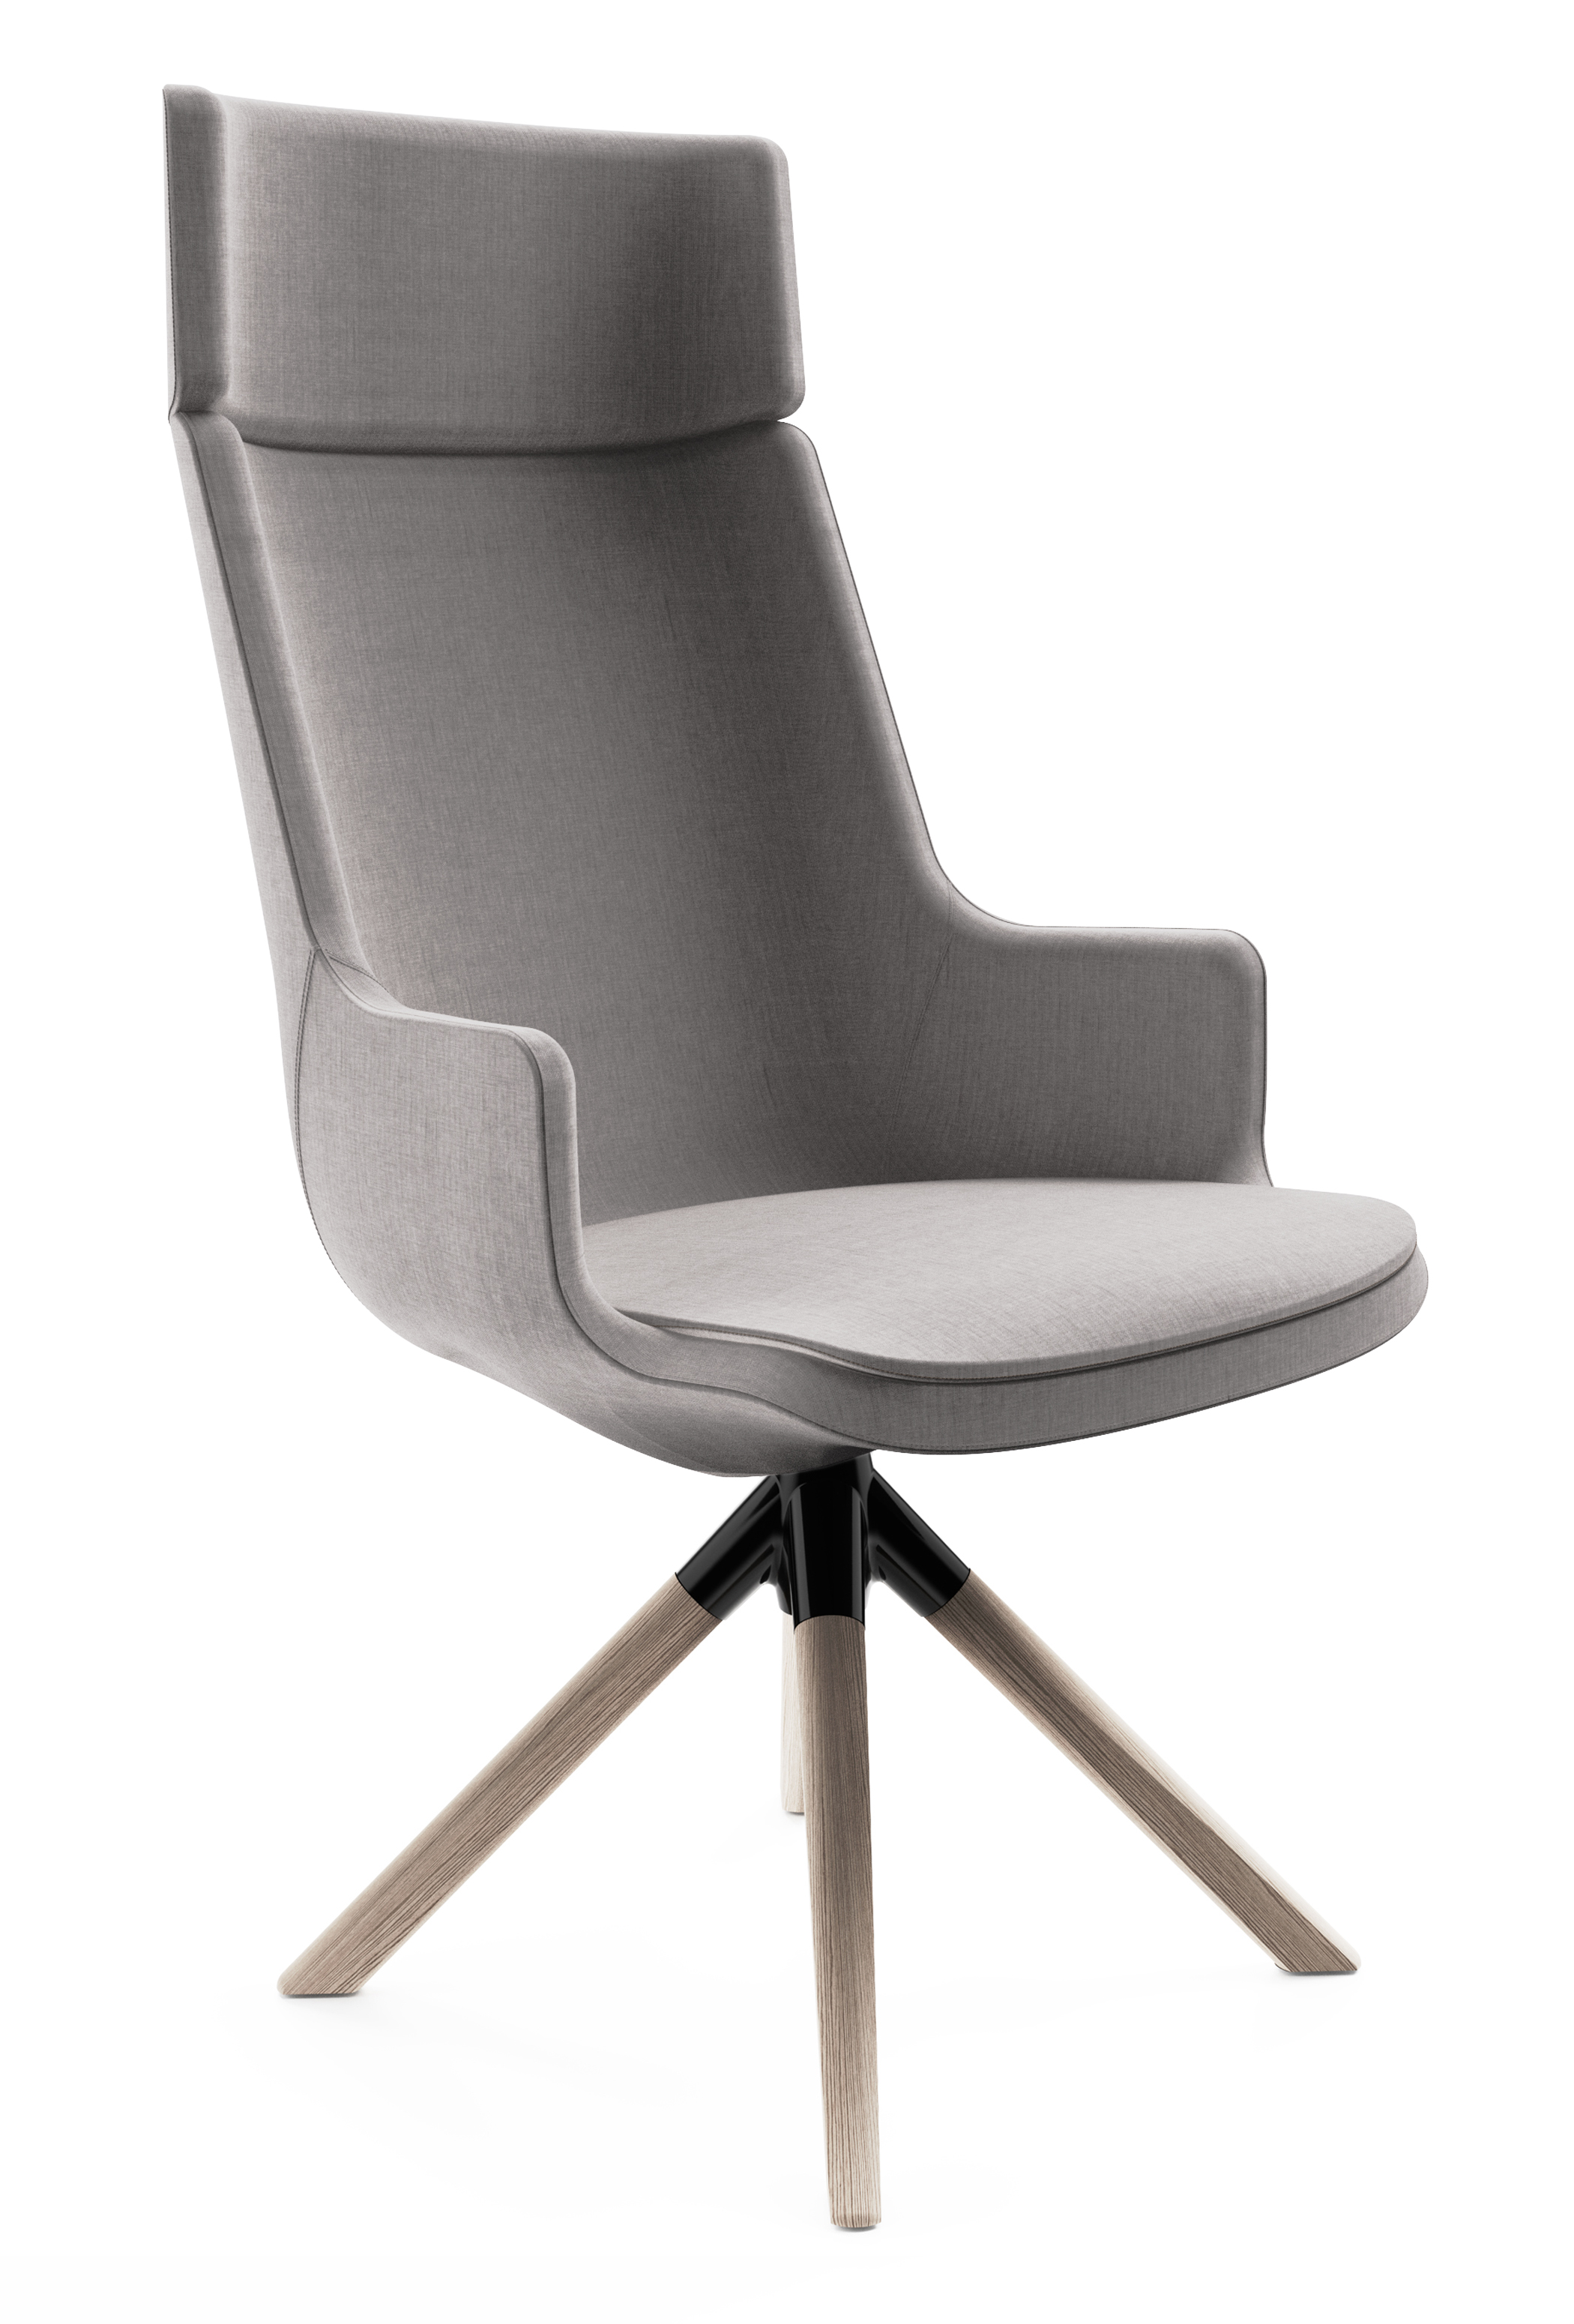 WS - Contour chair - High, 4 star - Black timber base (Front angle)